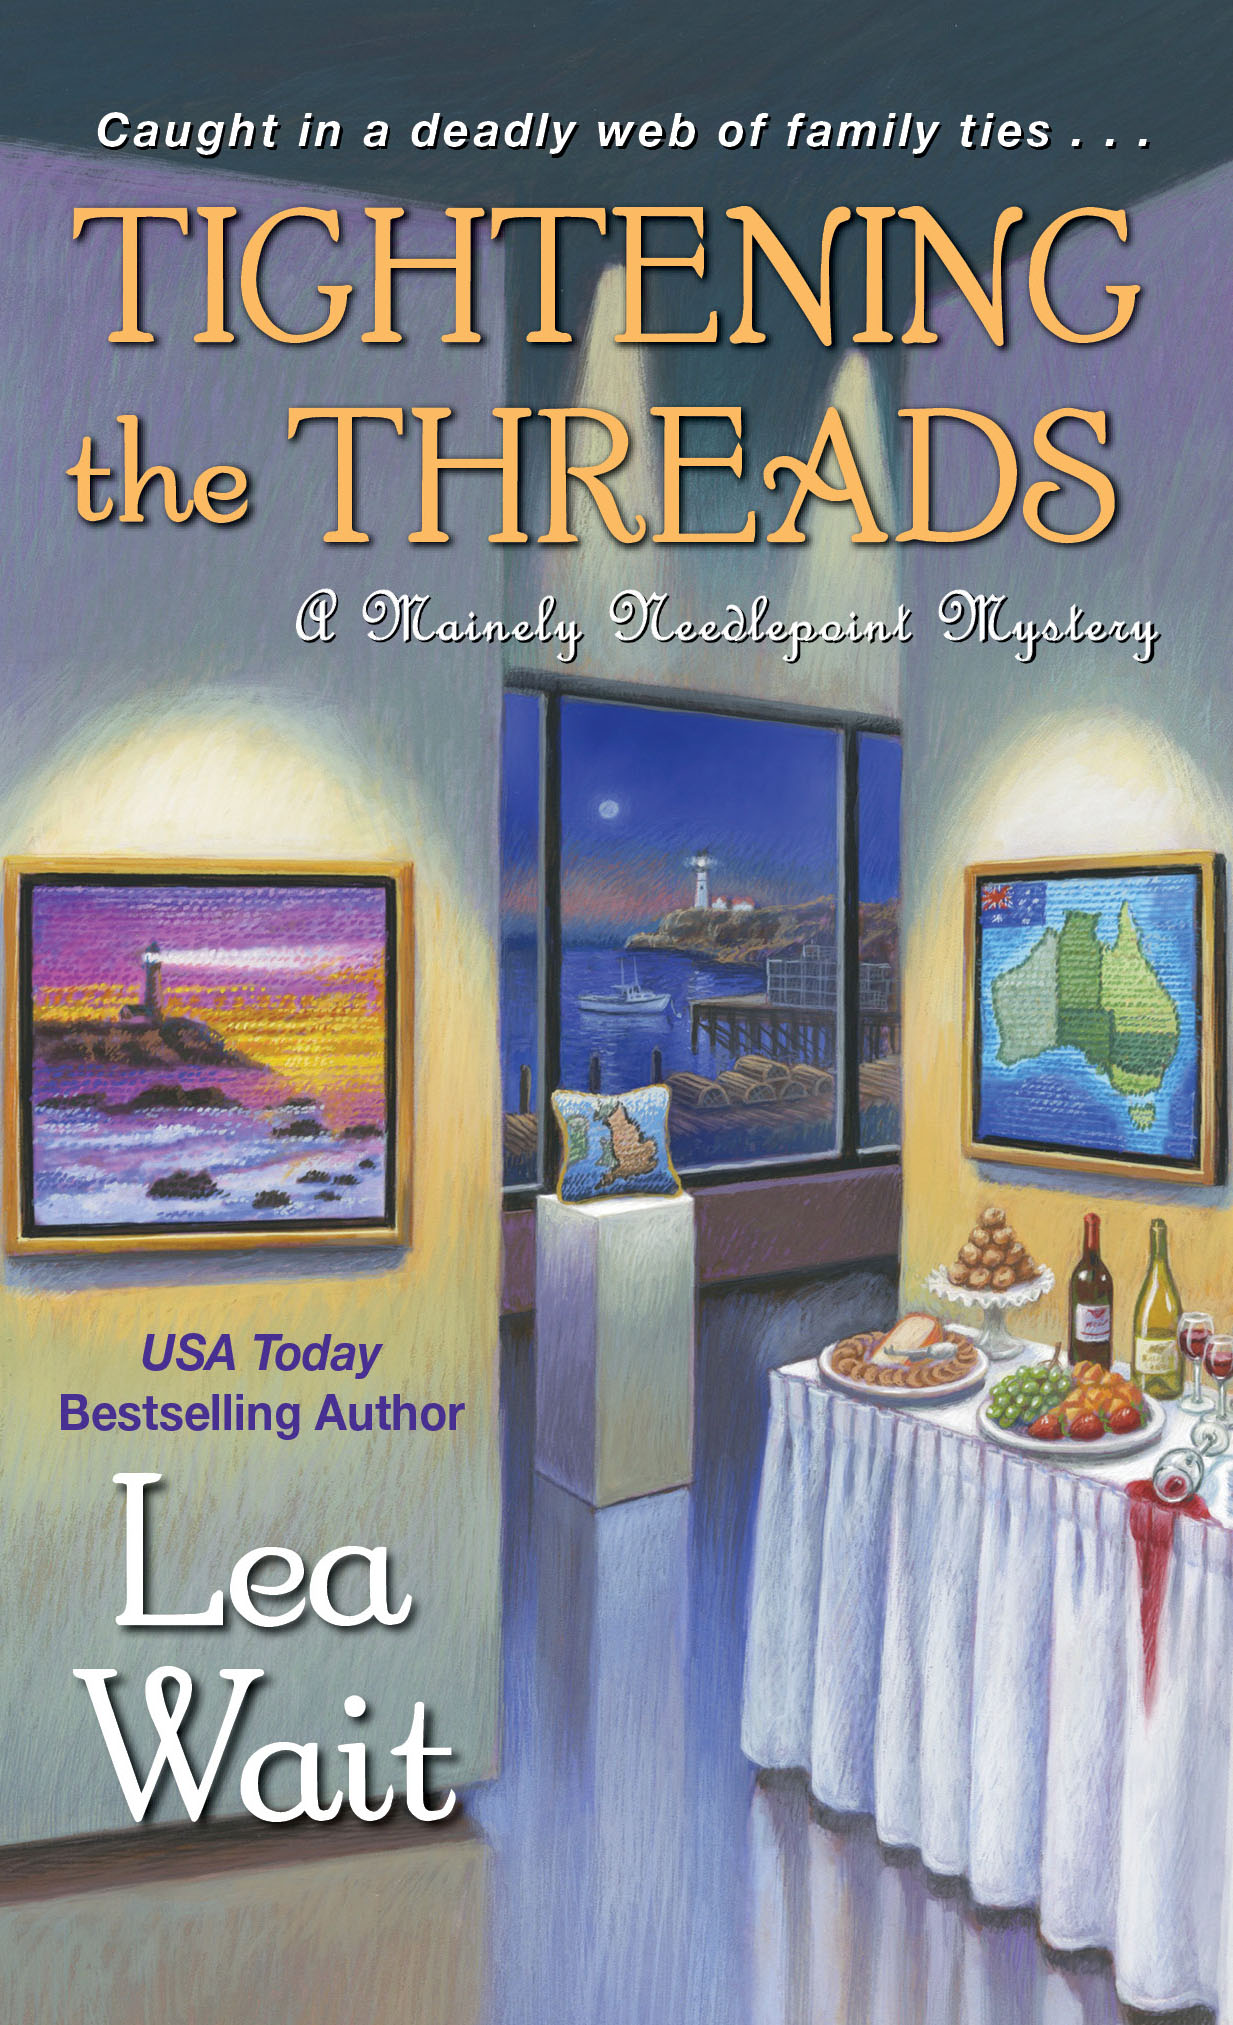 A Mainely Needlepoint Mystery: Tightening the Threads